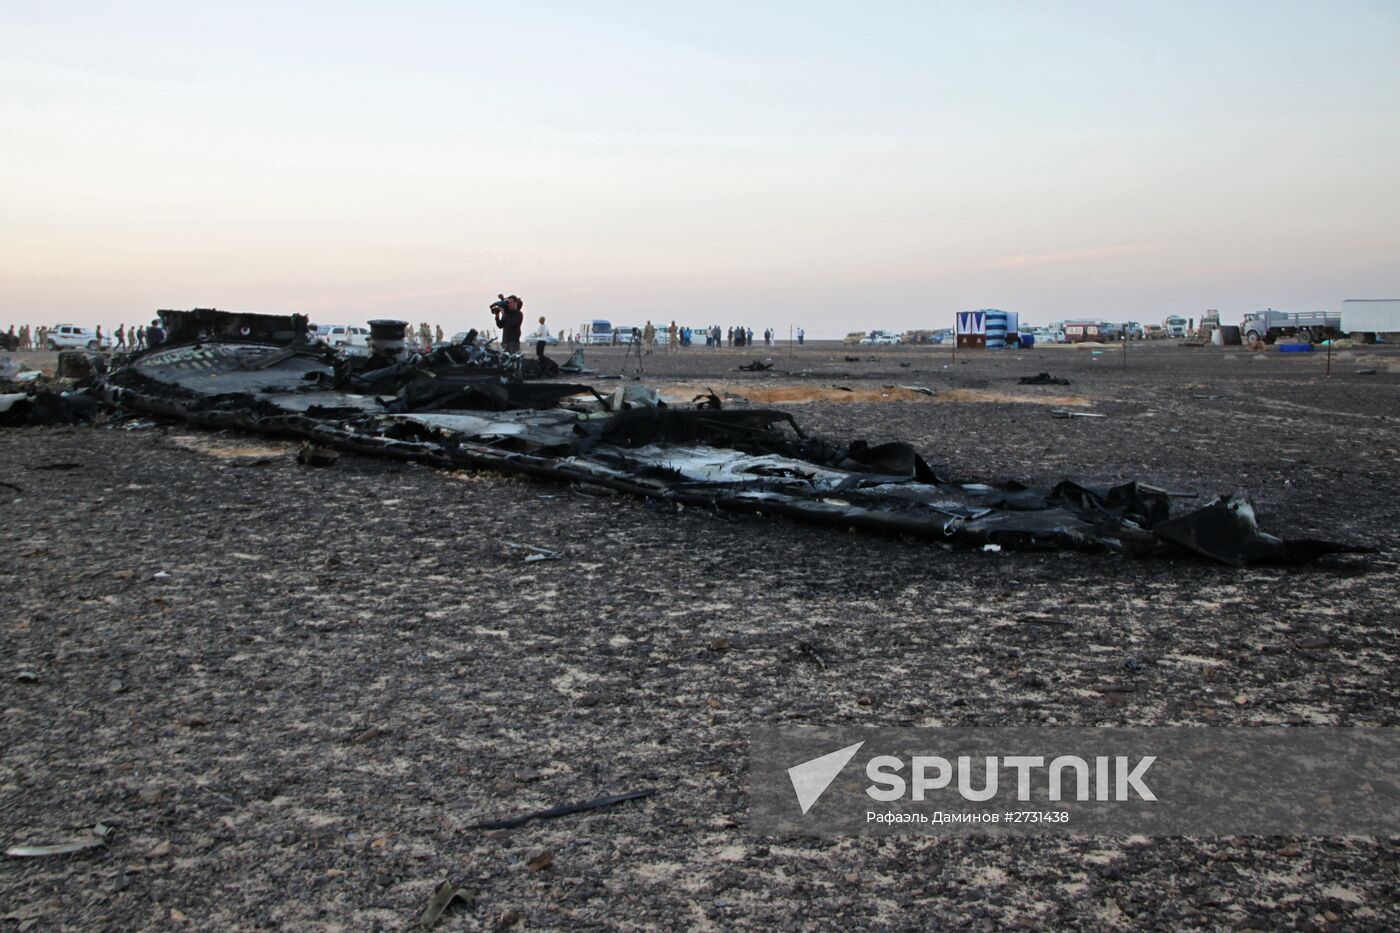 Search operations at Airbus A321 crash site in Egypt